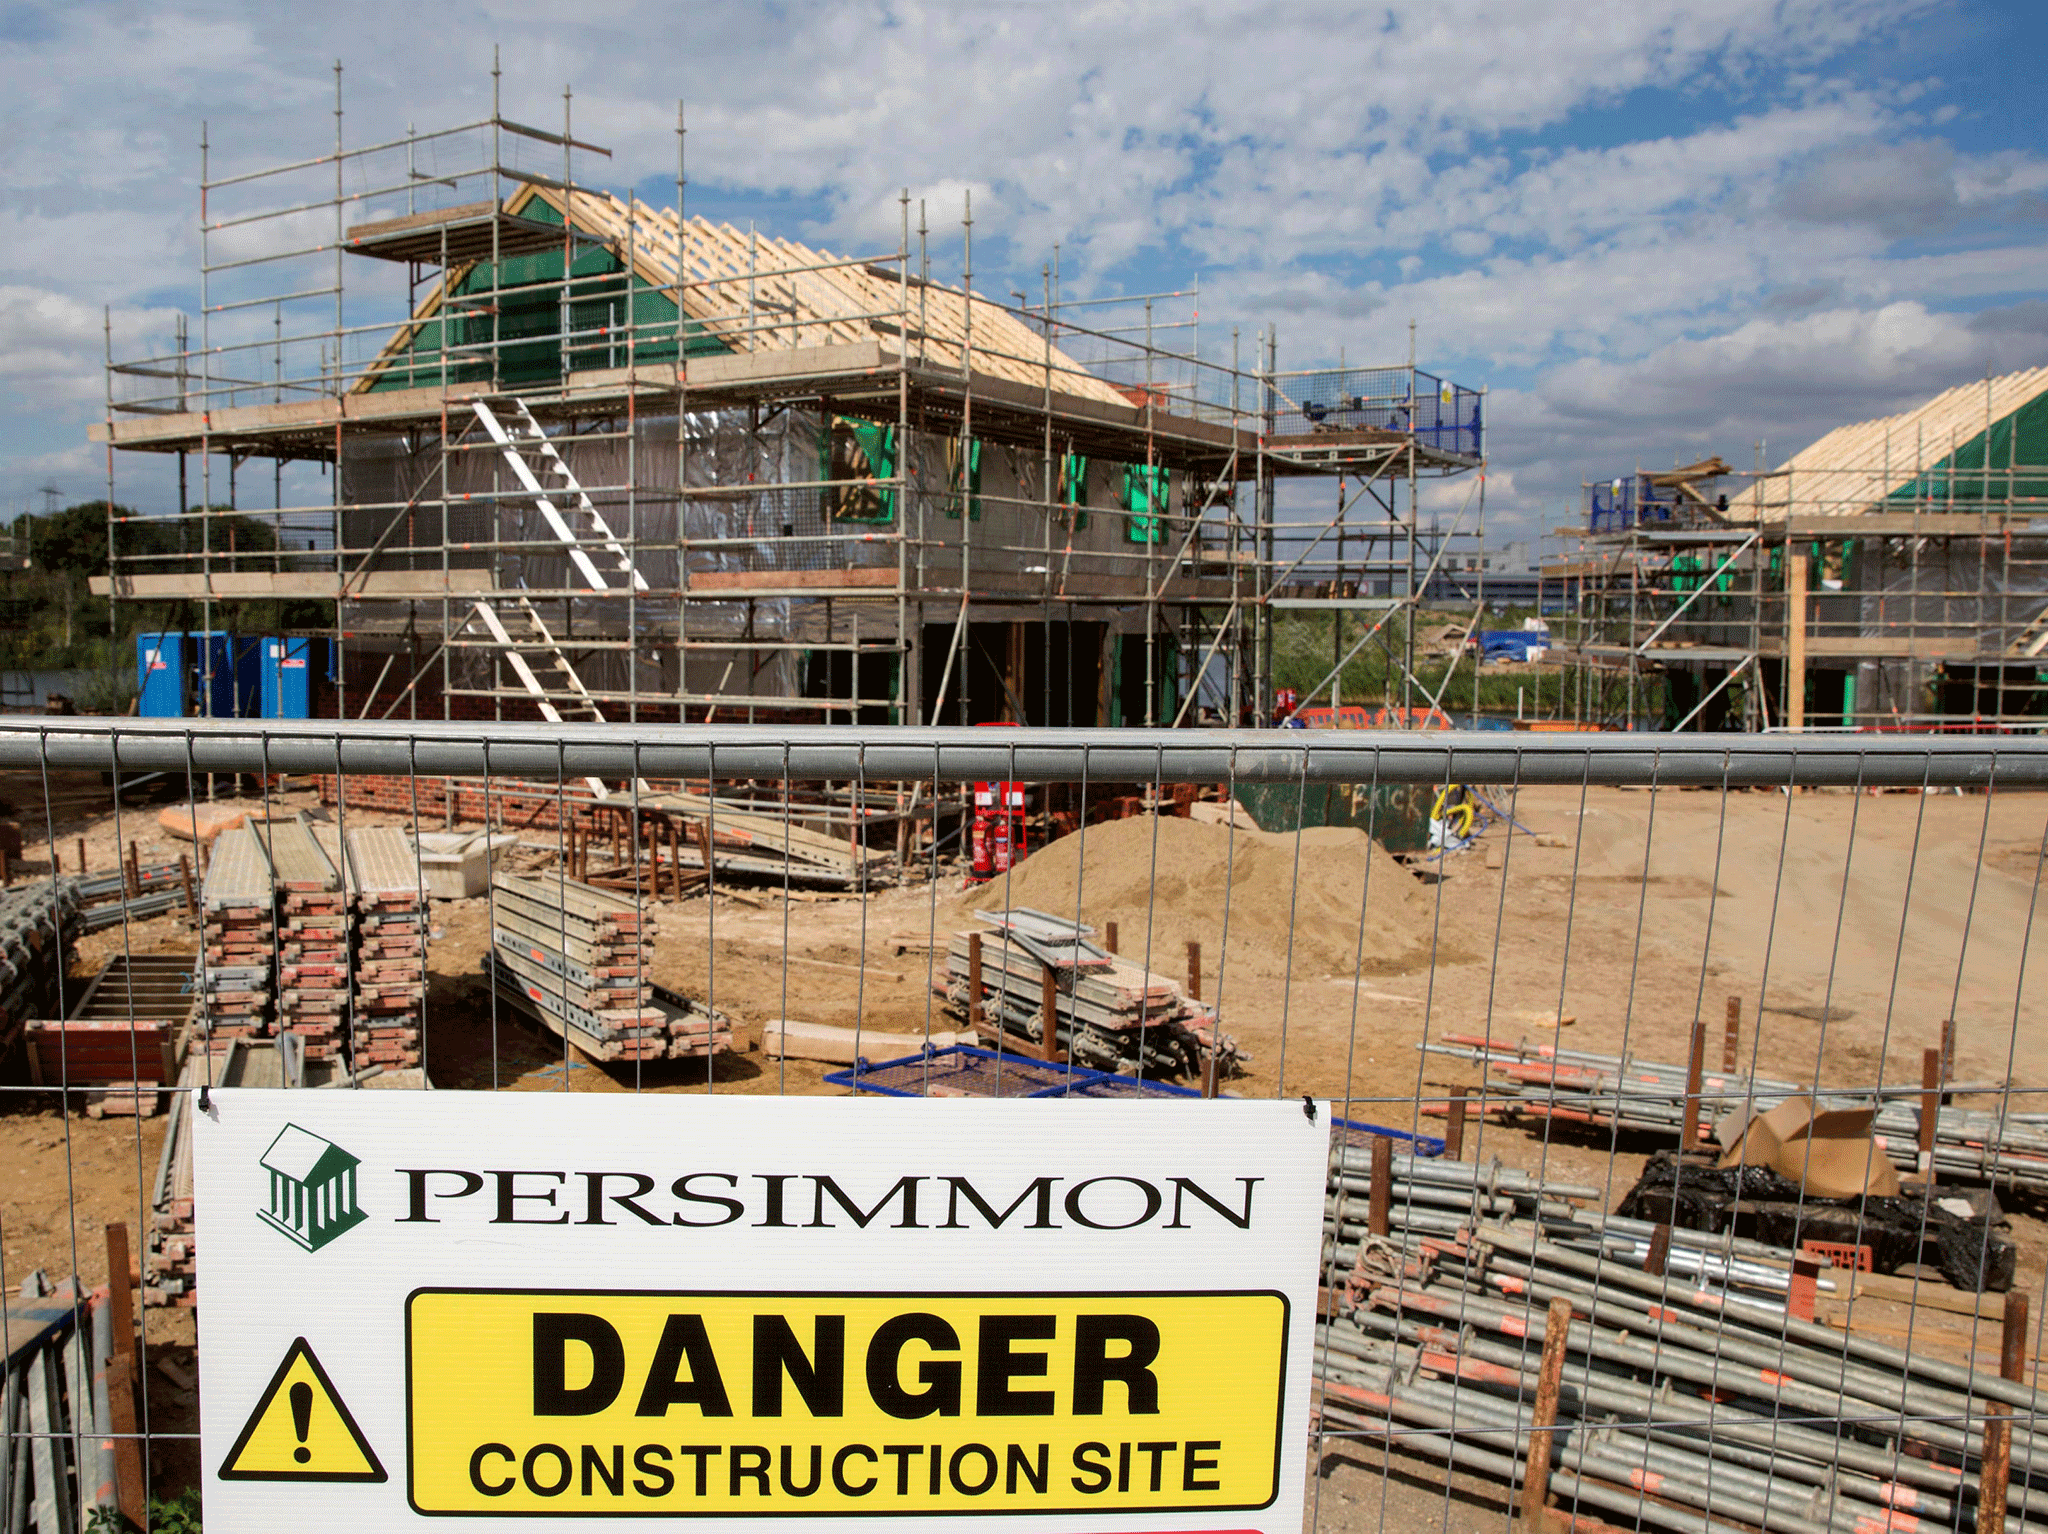 Persimmon’s profits soar past £1bn on back of Help to Buy scheme